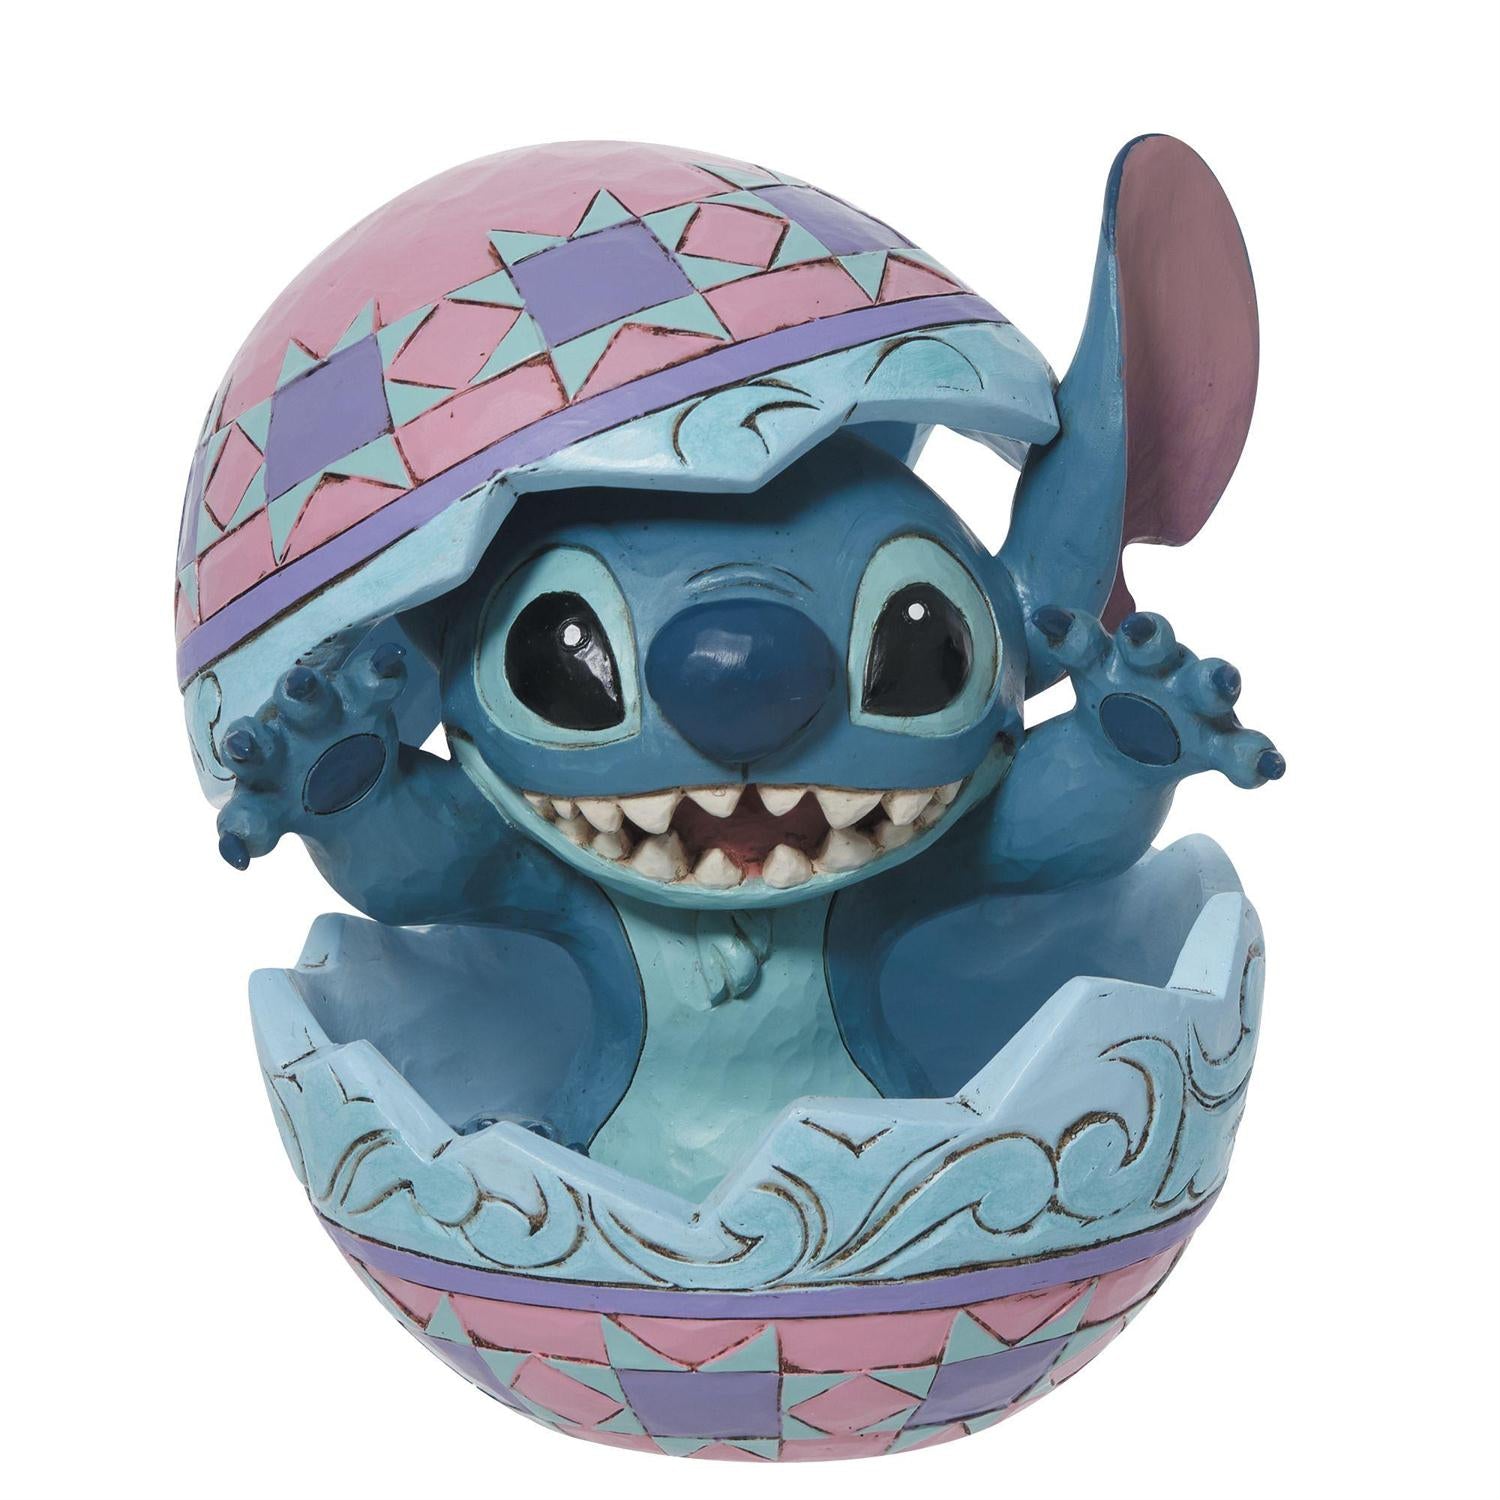 Stitch in Easter Egg Figurine Jim Shore Disney Traditions Collectible